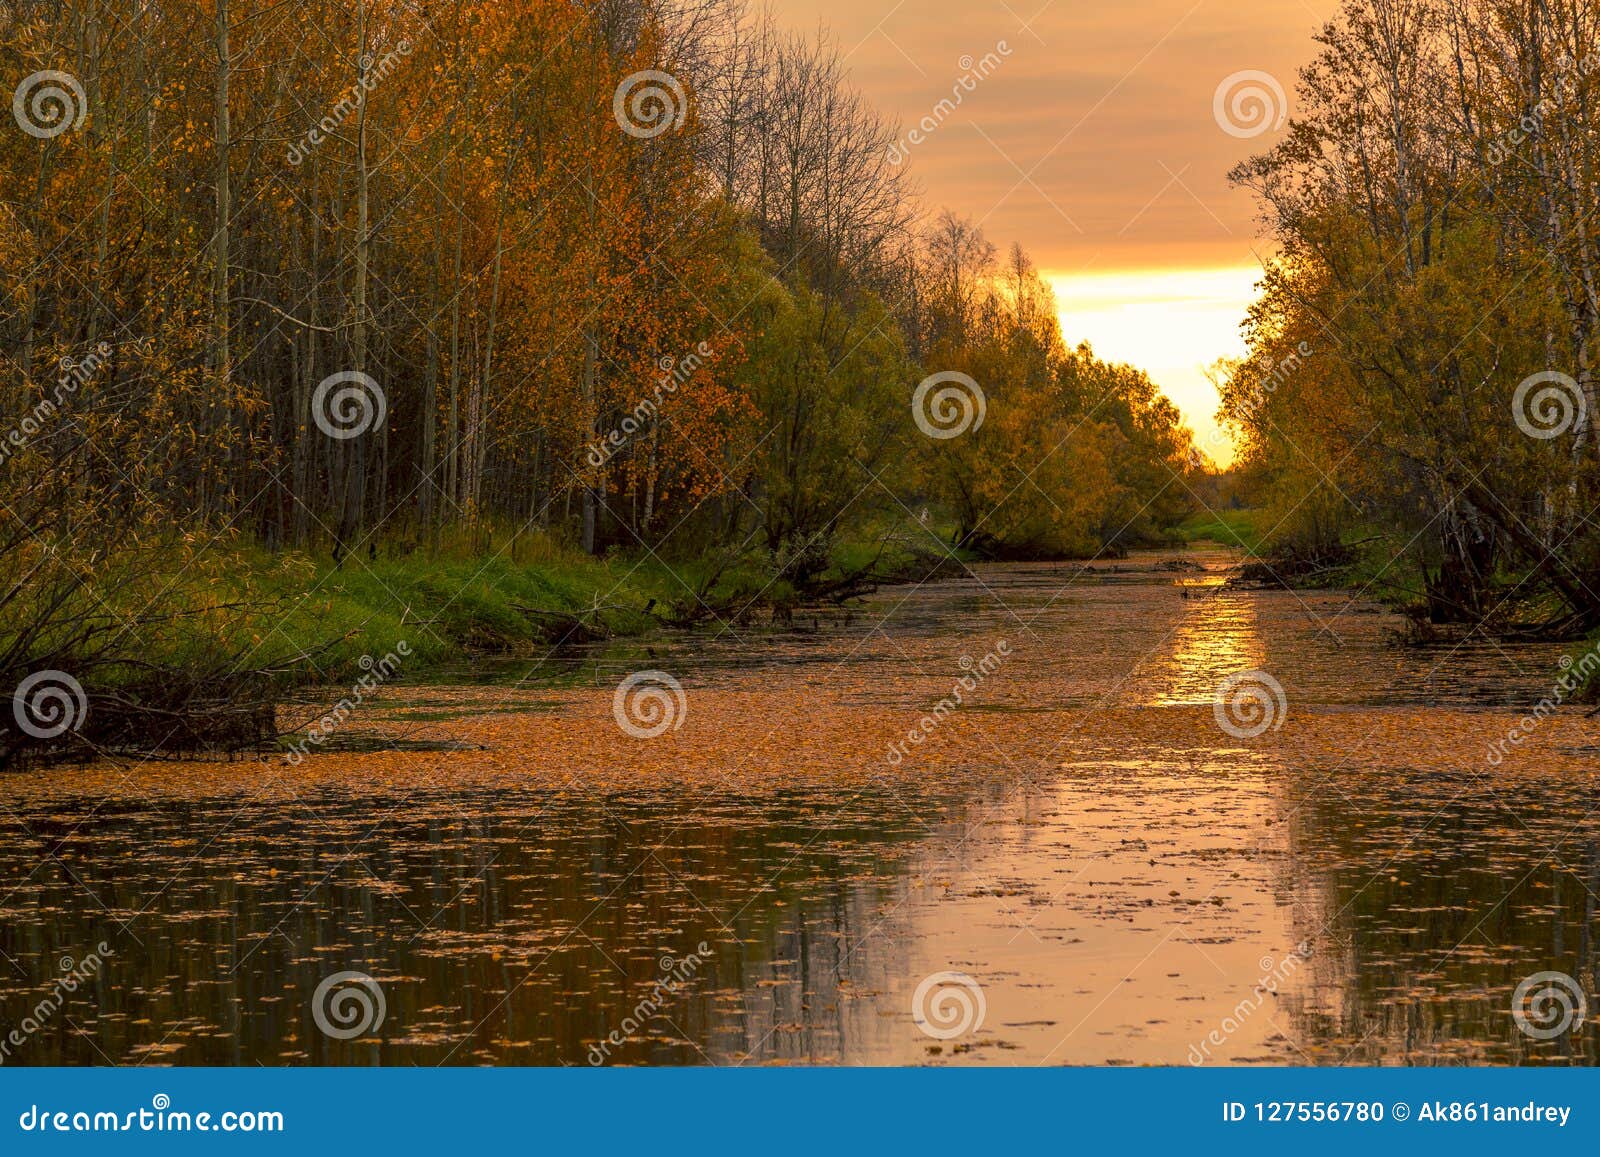 Sunrise By The Forest River In Late Autumn Stock Photo Image Of Birch